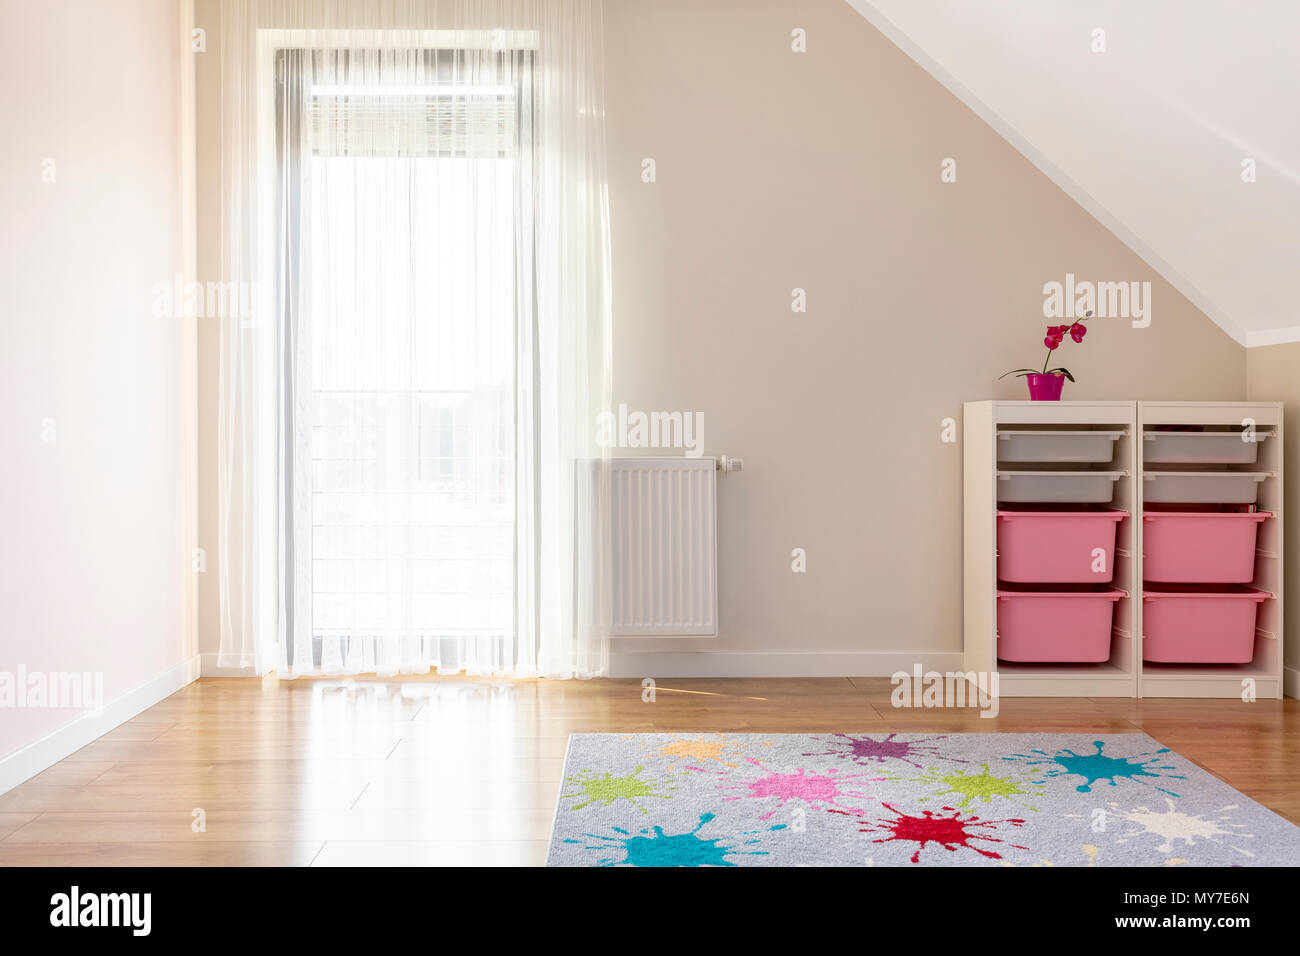 Patterned colorful carpet in kid's room interior with shelves and window. Real photo Stock Photo